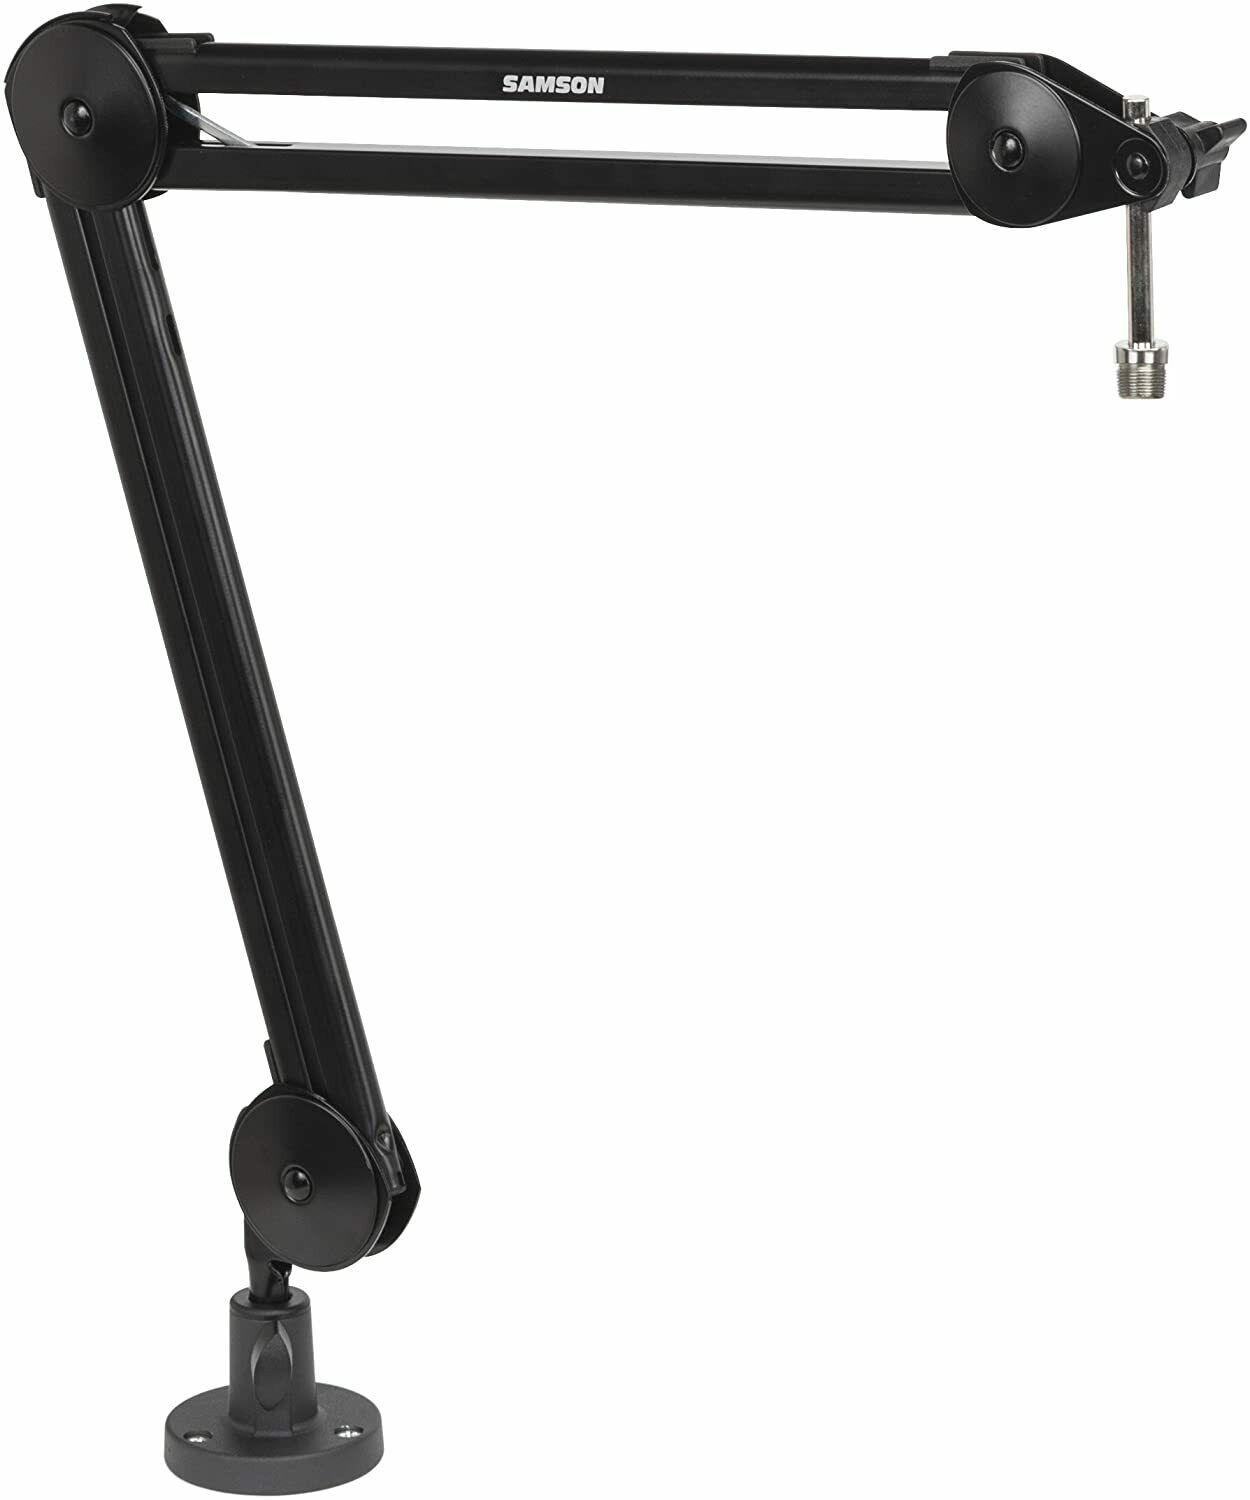 Samson MBA38-38” Microphone Boom Arm for Podcasting and Streaming (MBA38) - Pro-Distributing